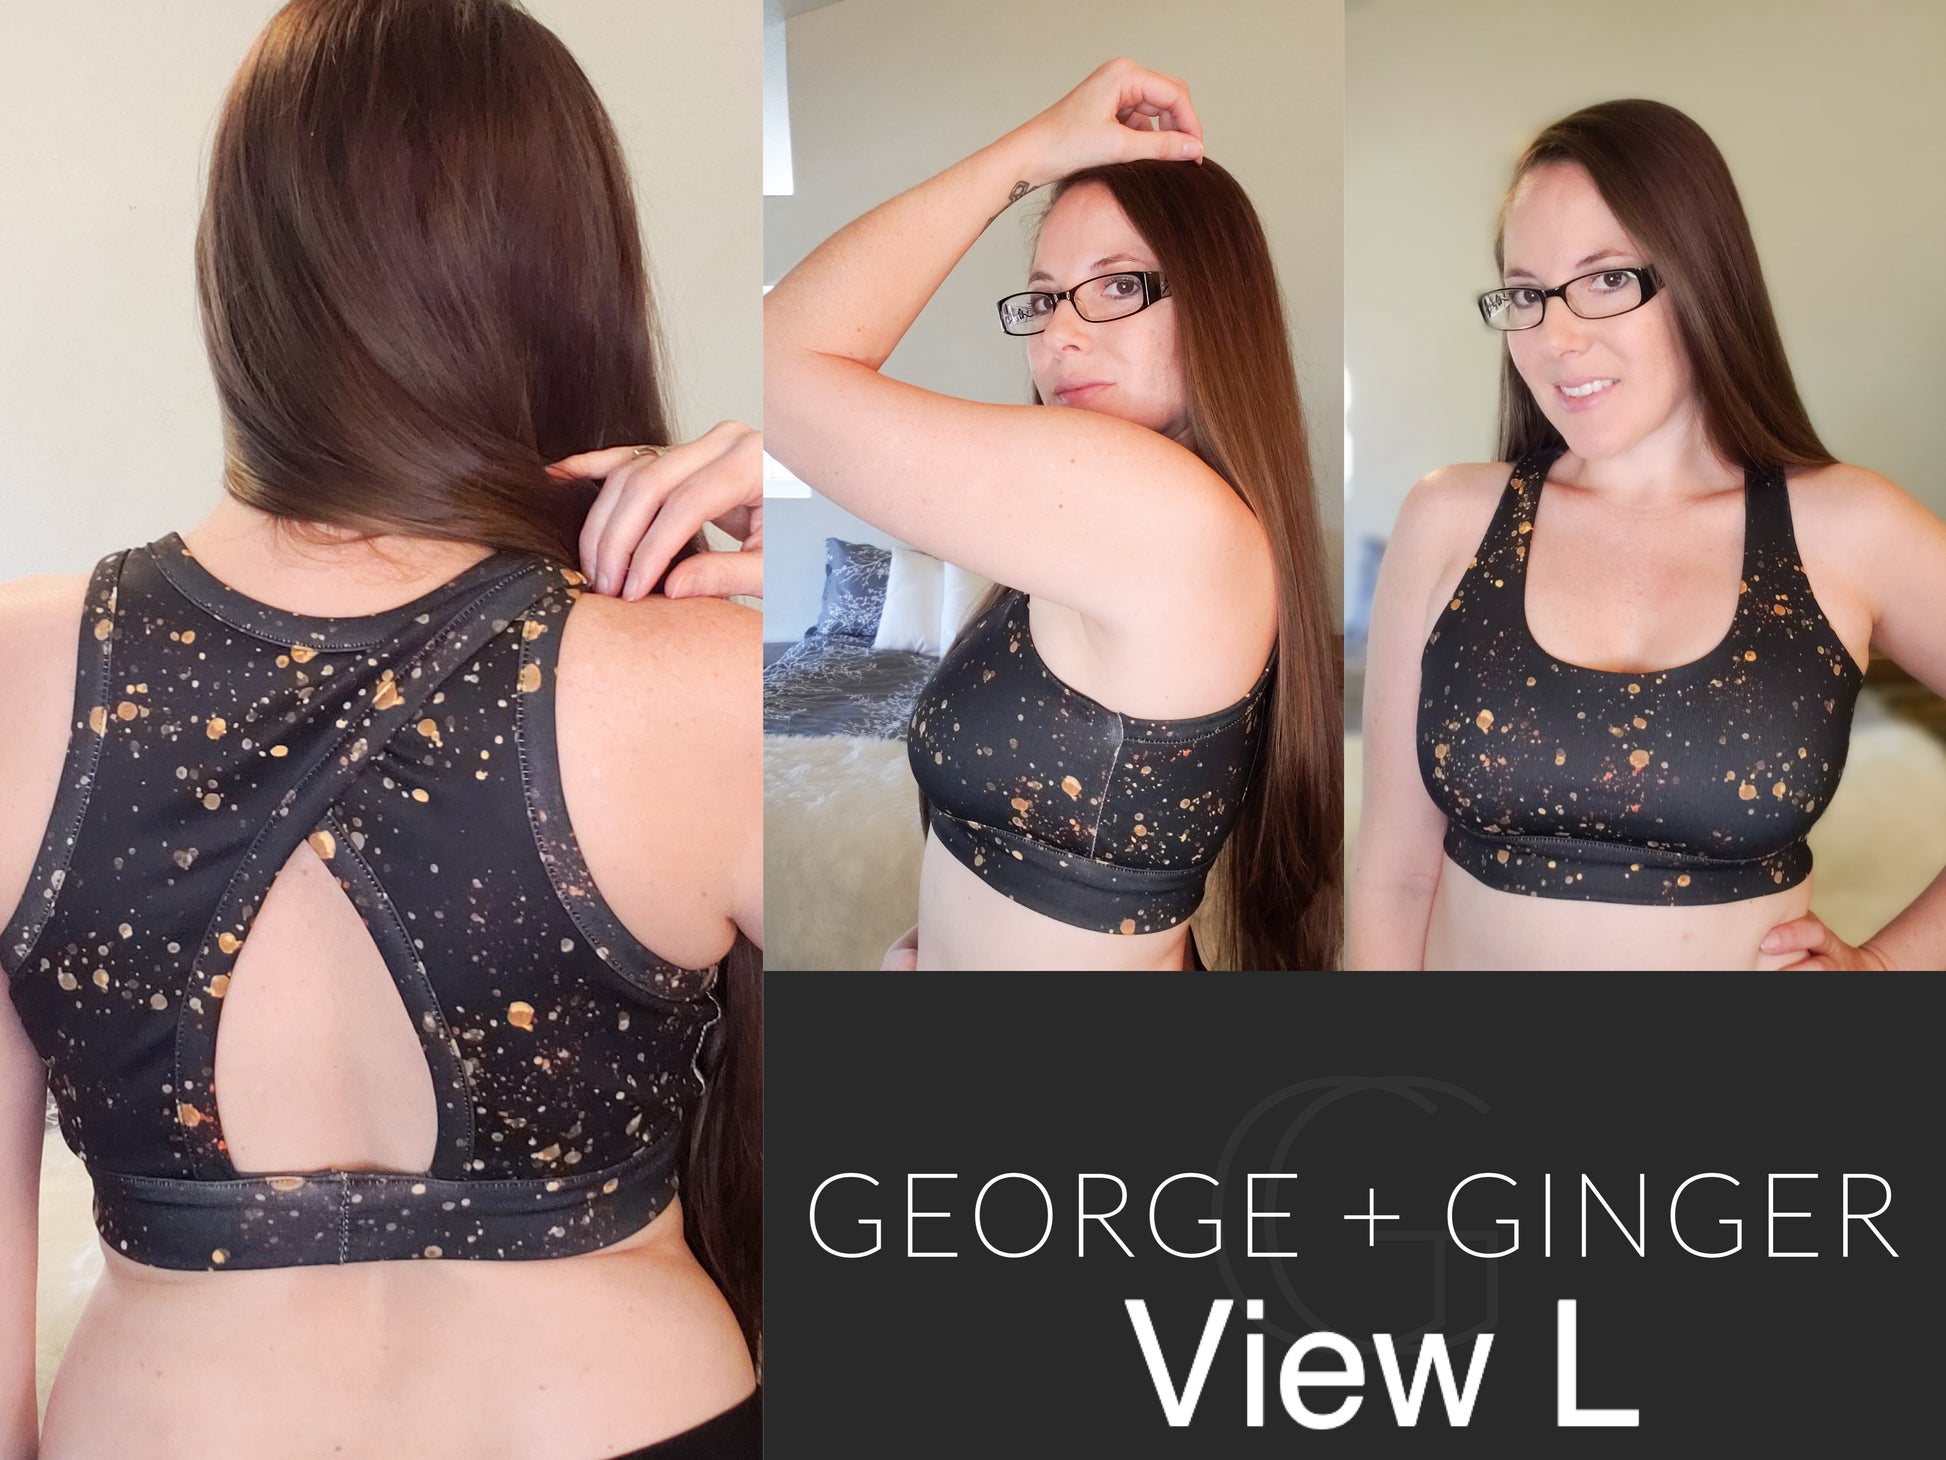 The Switch It Up Bra (Back Edition) PDF Sewing Pattern – George